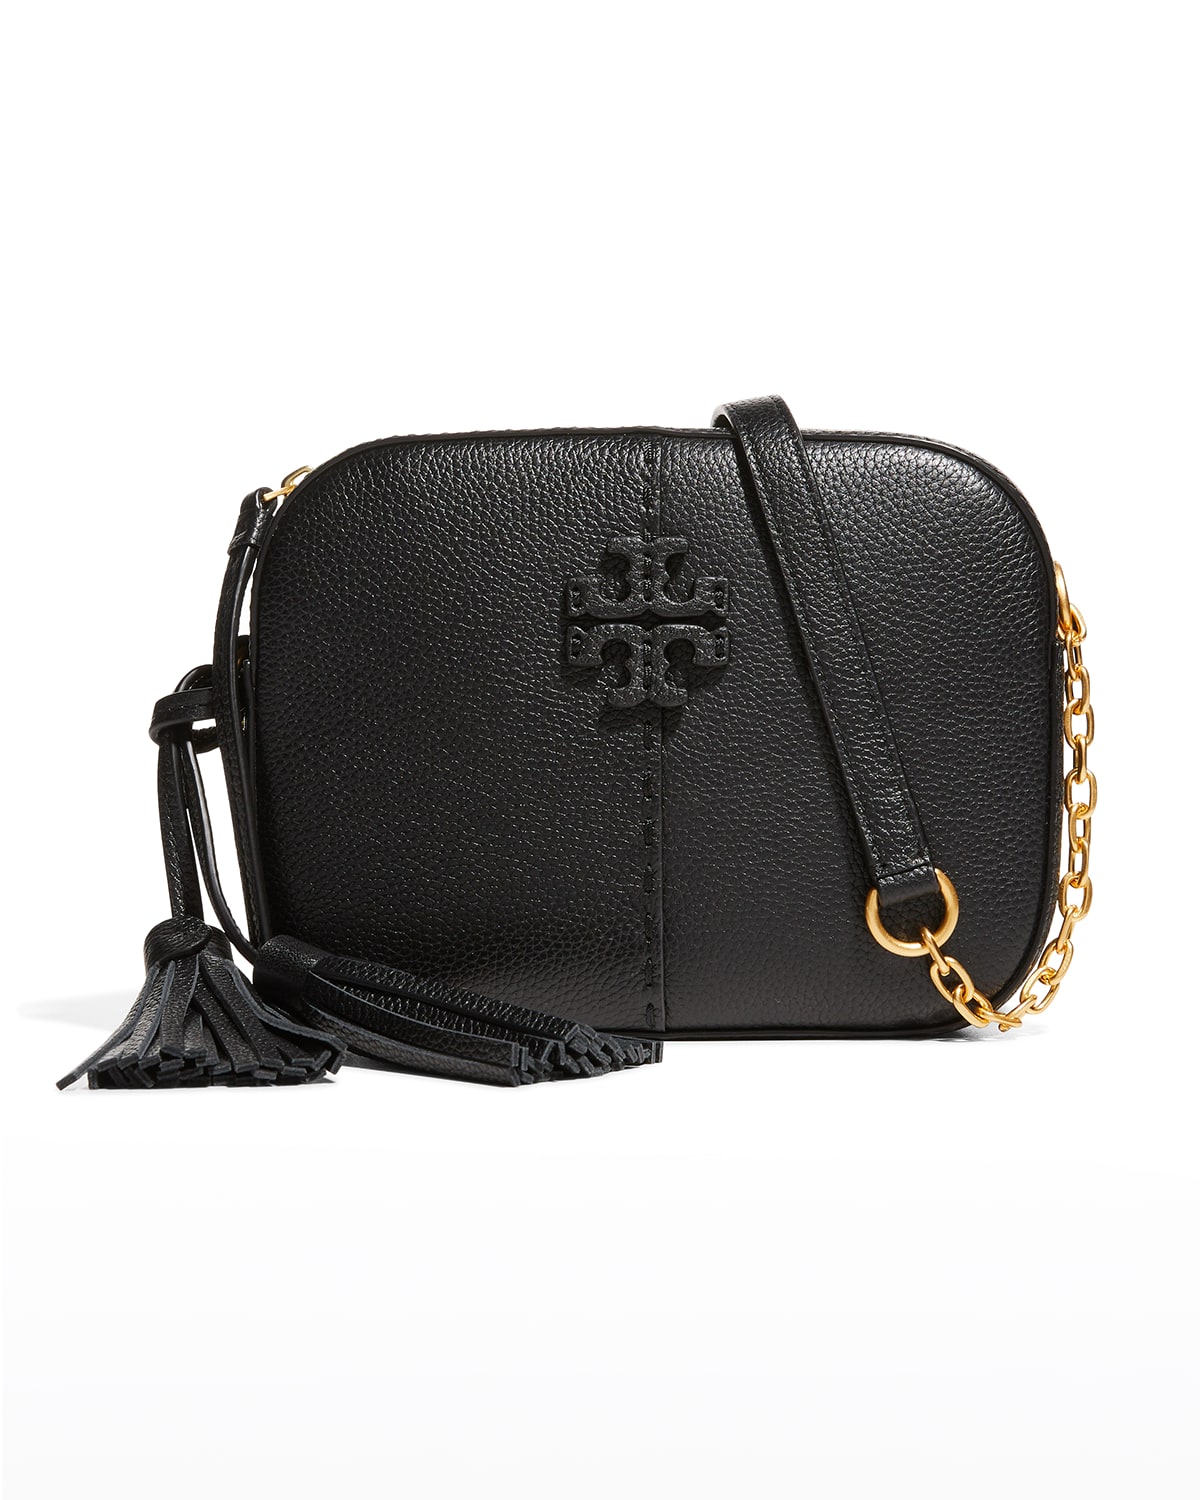 Tory Burch Fleming Leather Fannypack Bag | Neiman Marcus